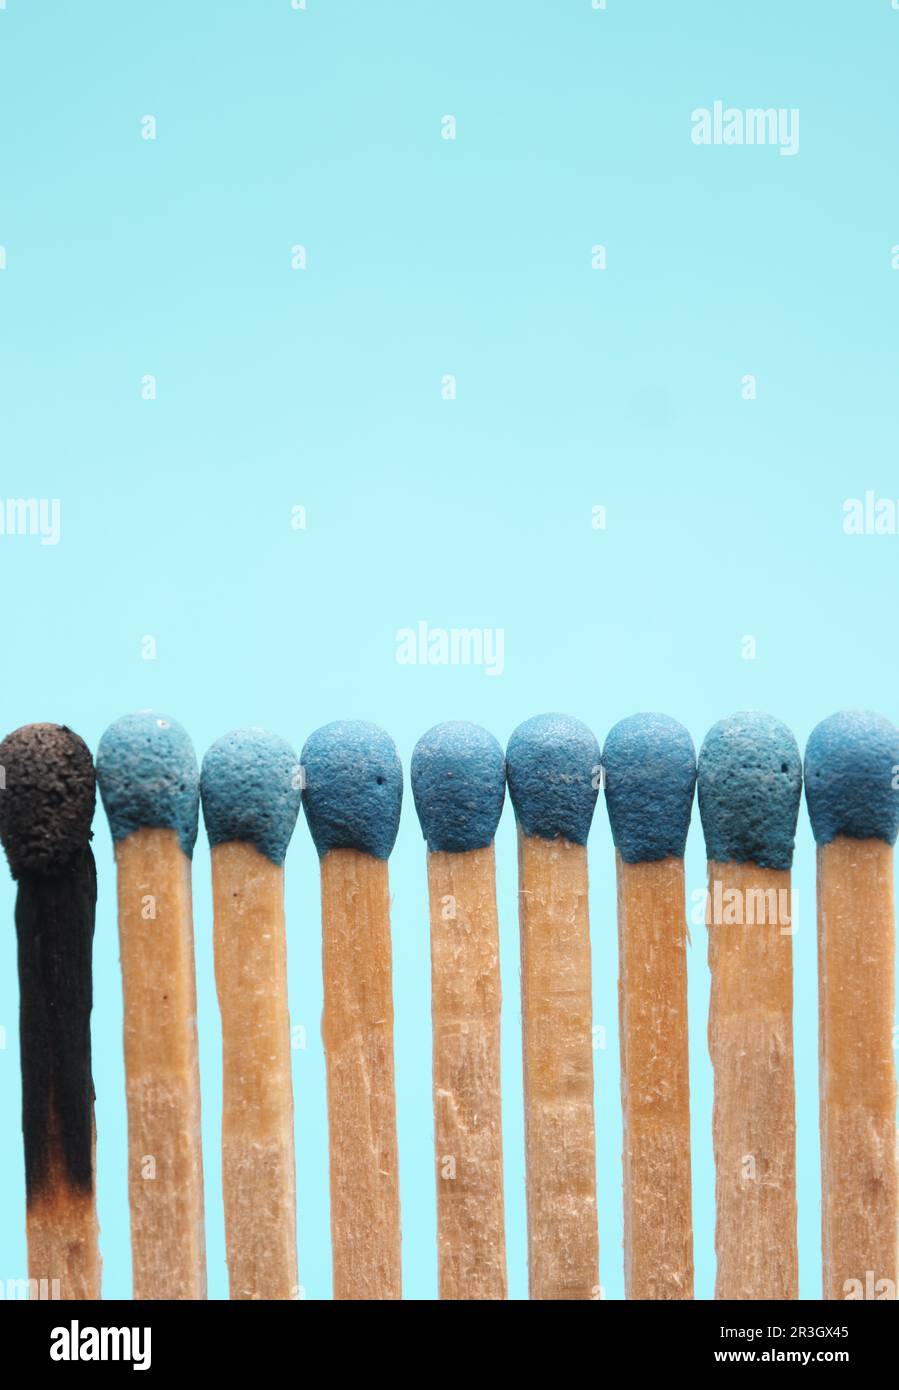 Matches against a blue background, one burned out, career or health care concept Stock Photo